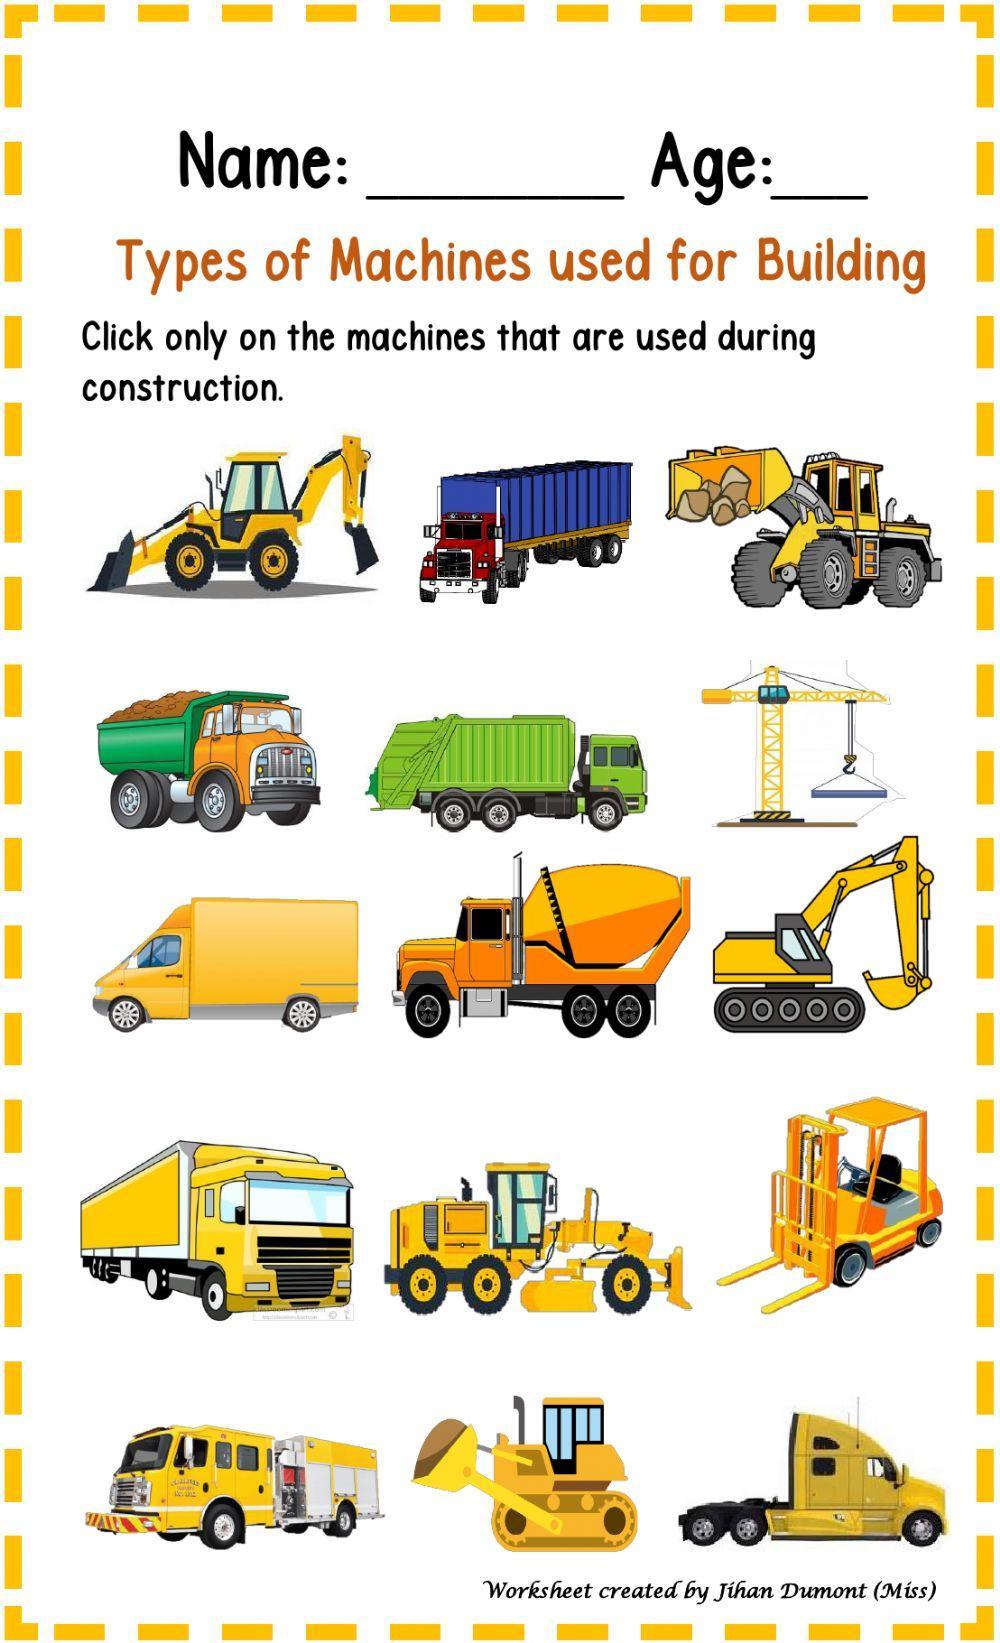 Types of Machines used for Building